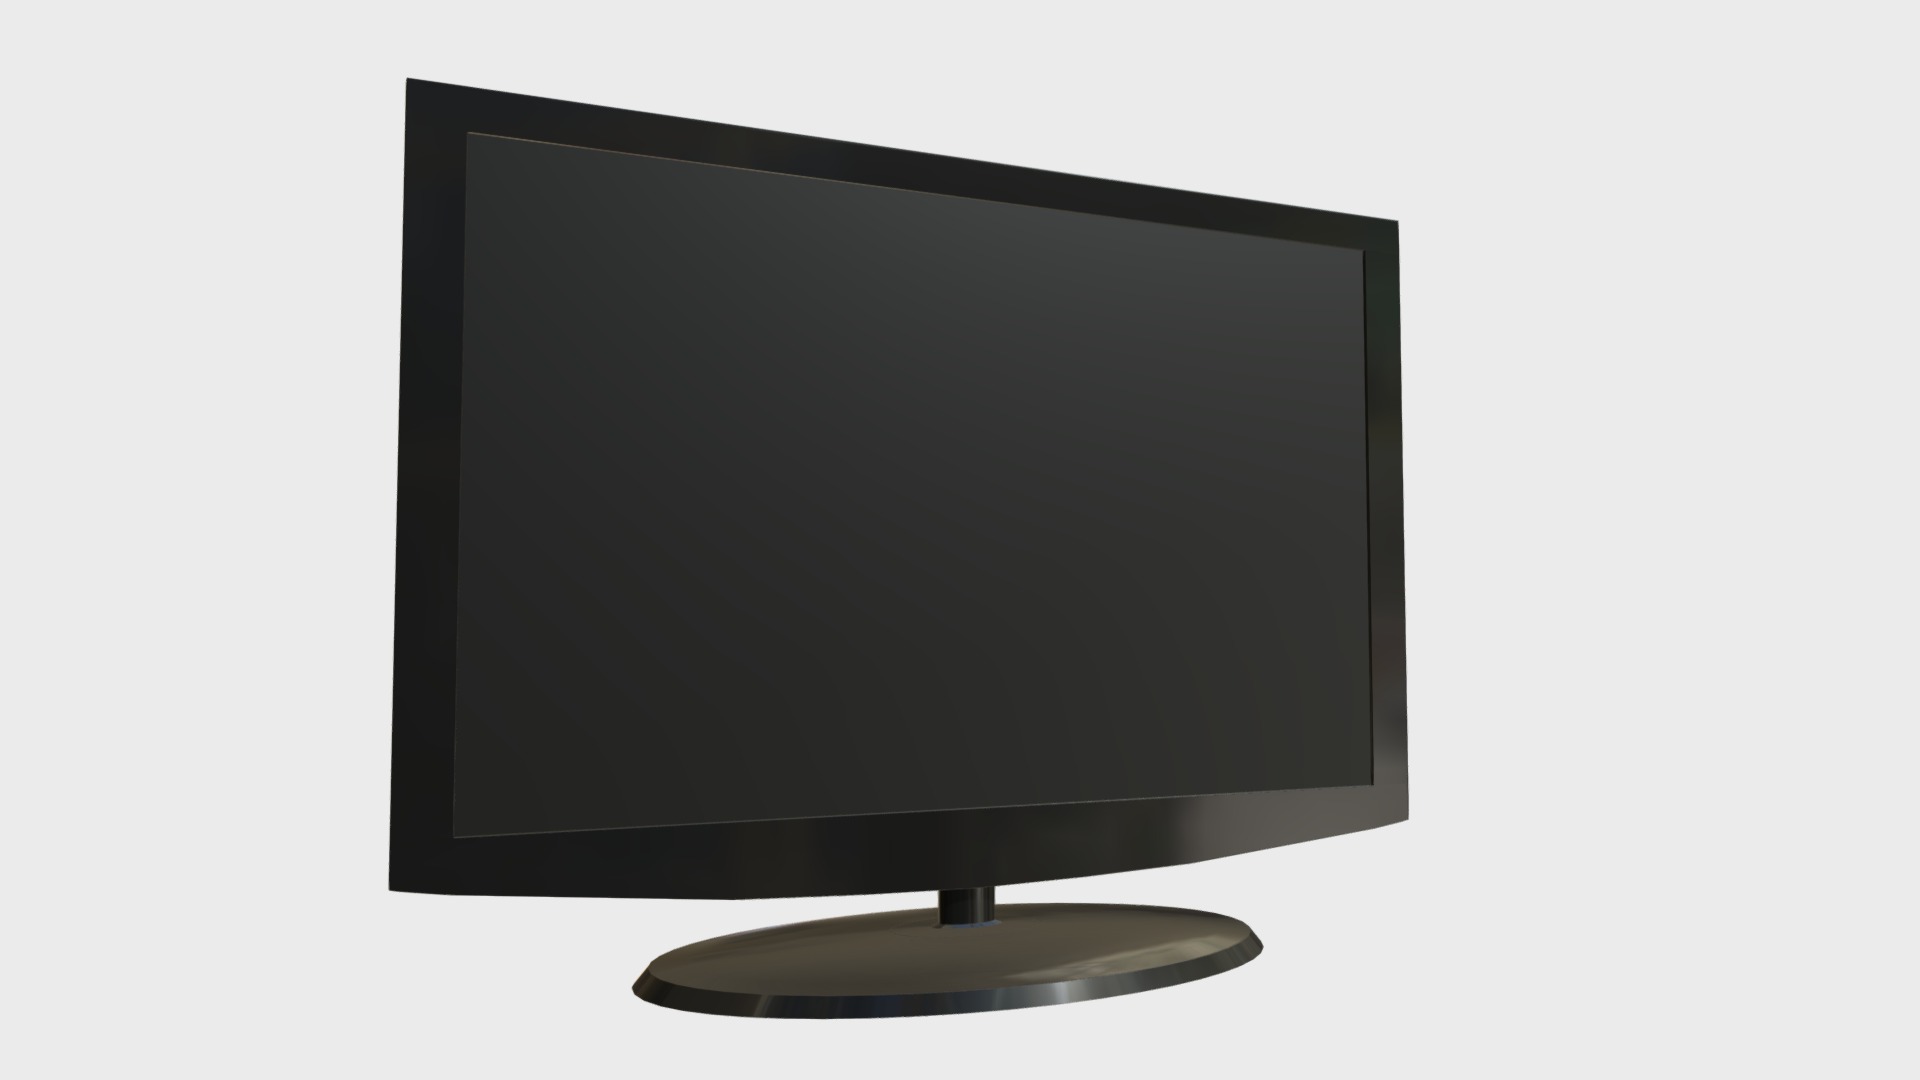 3D model Flat wide TV - This is a 3D model of the Flat wide TV. The 3D model is about a black television screen.